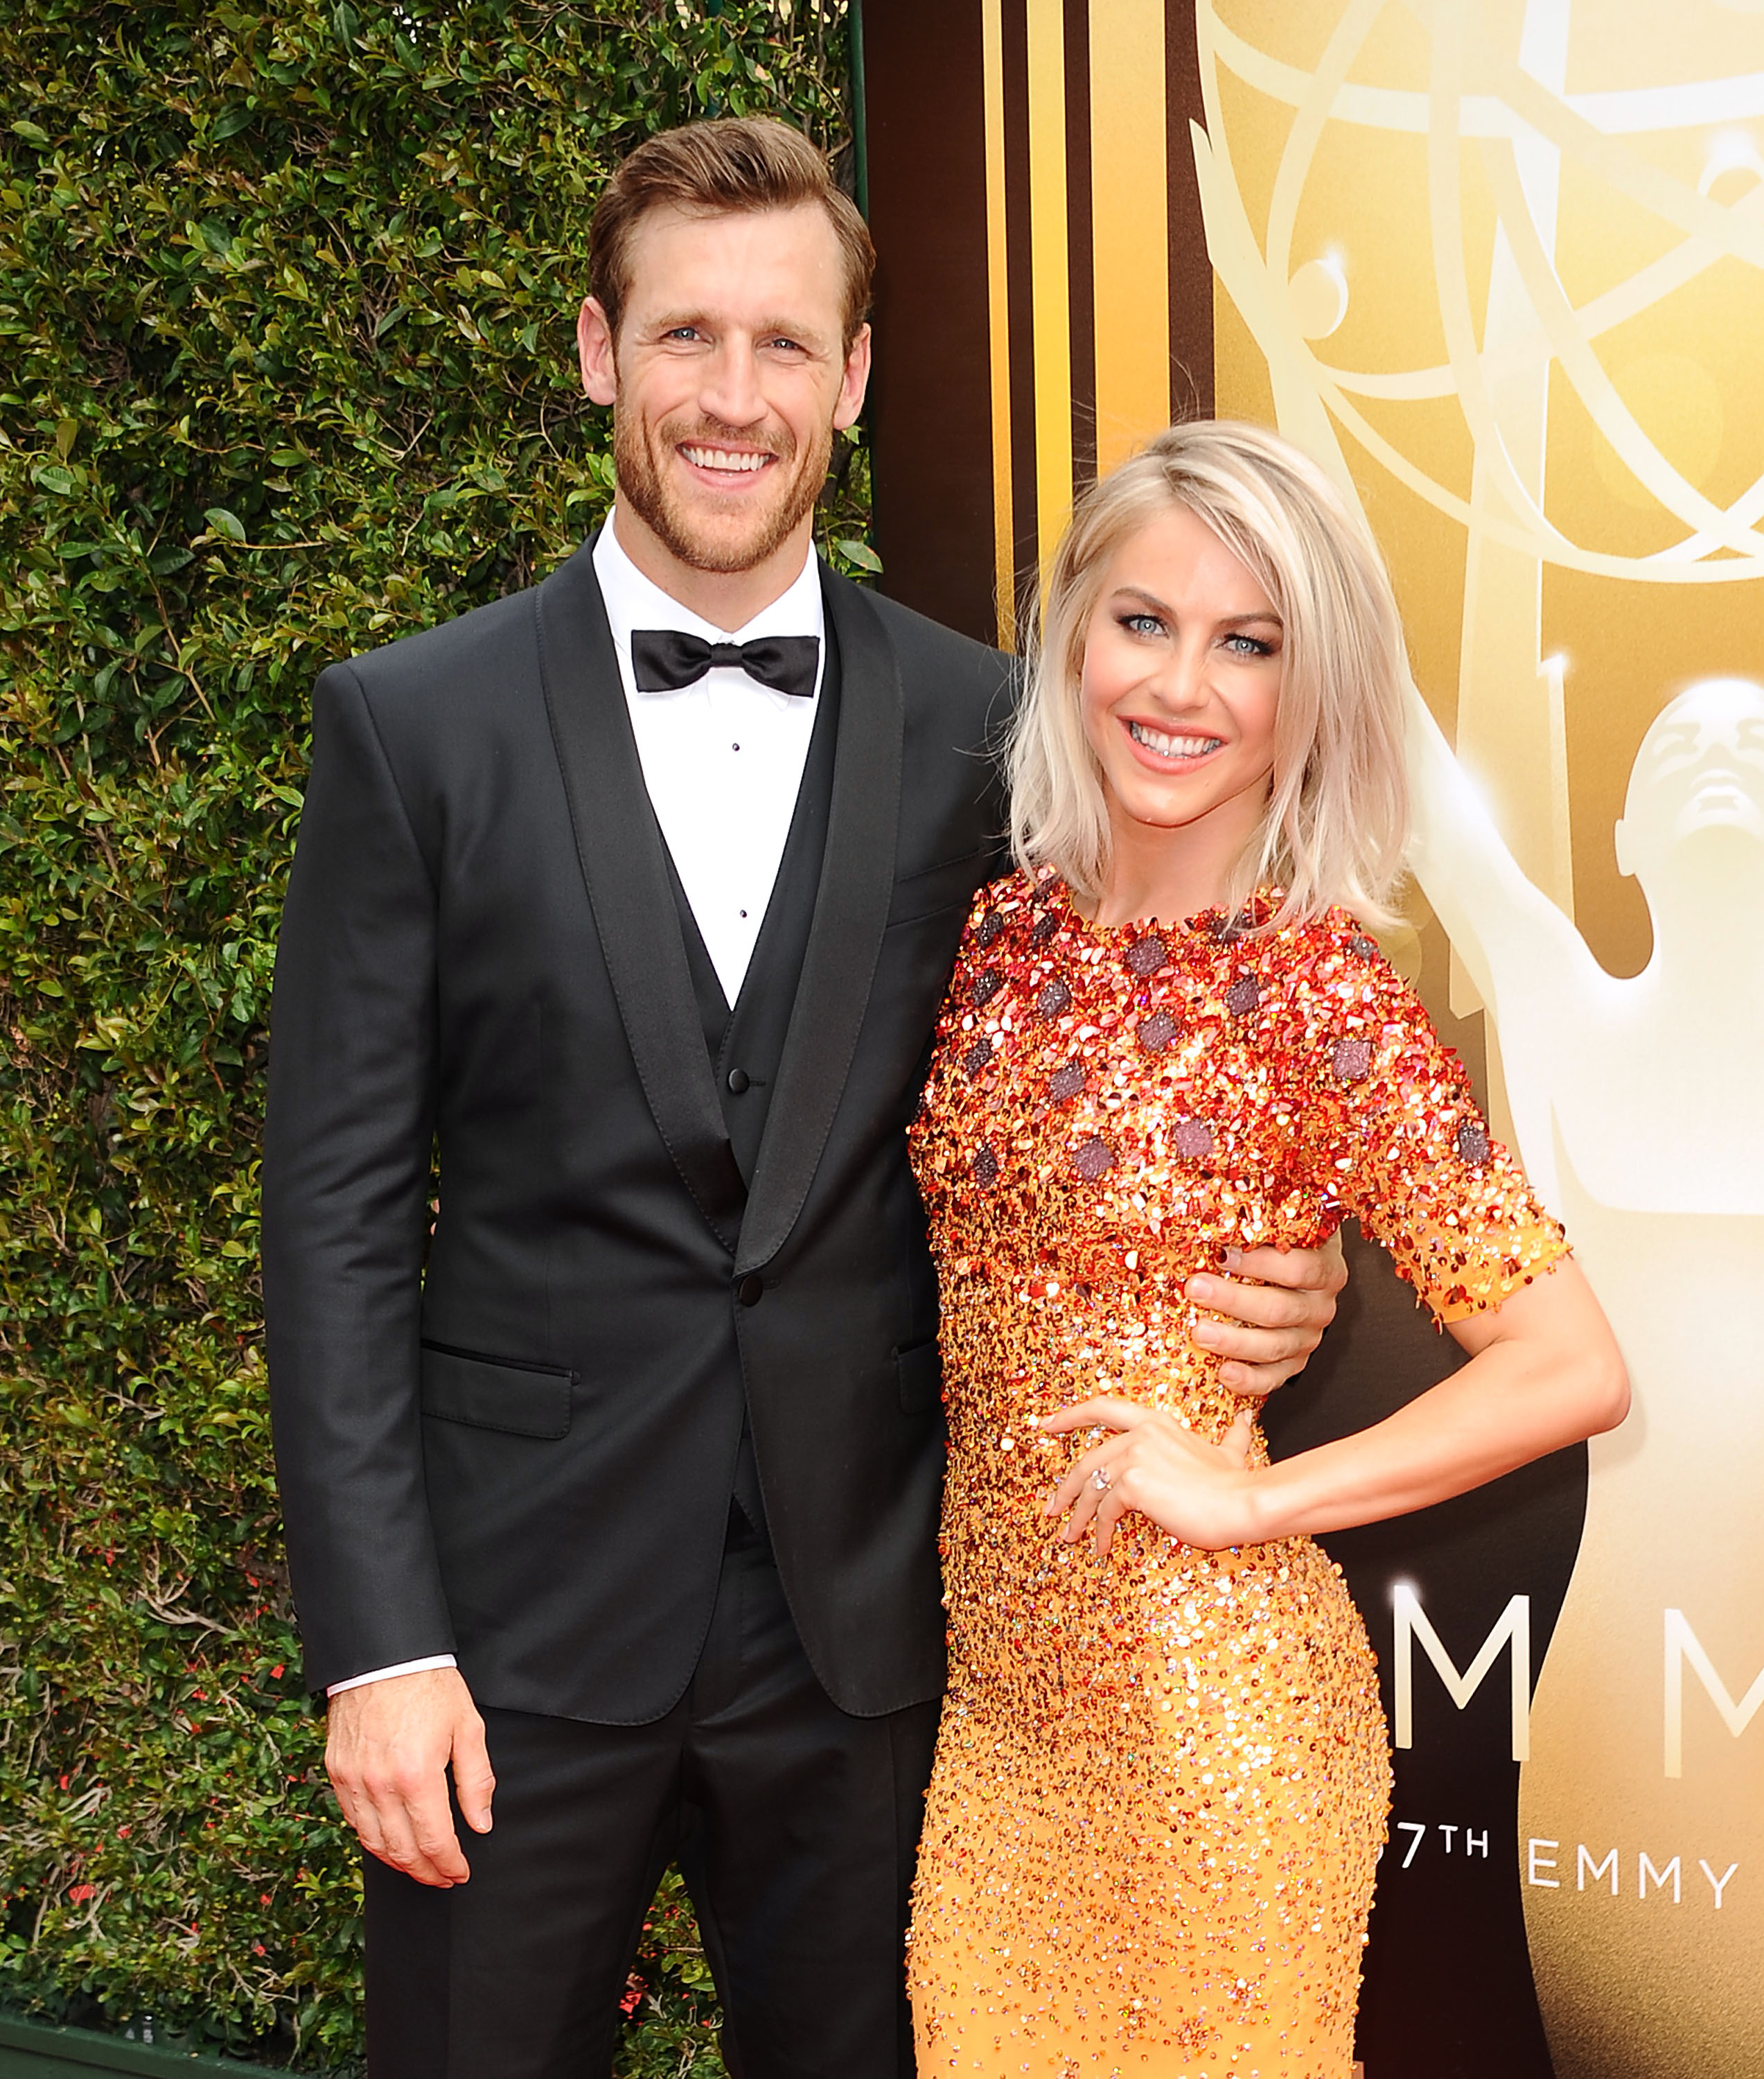 Is Julianne Hough Pregnant With Her First Baby?